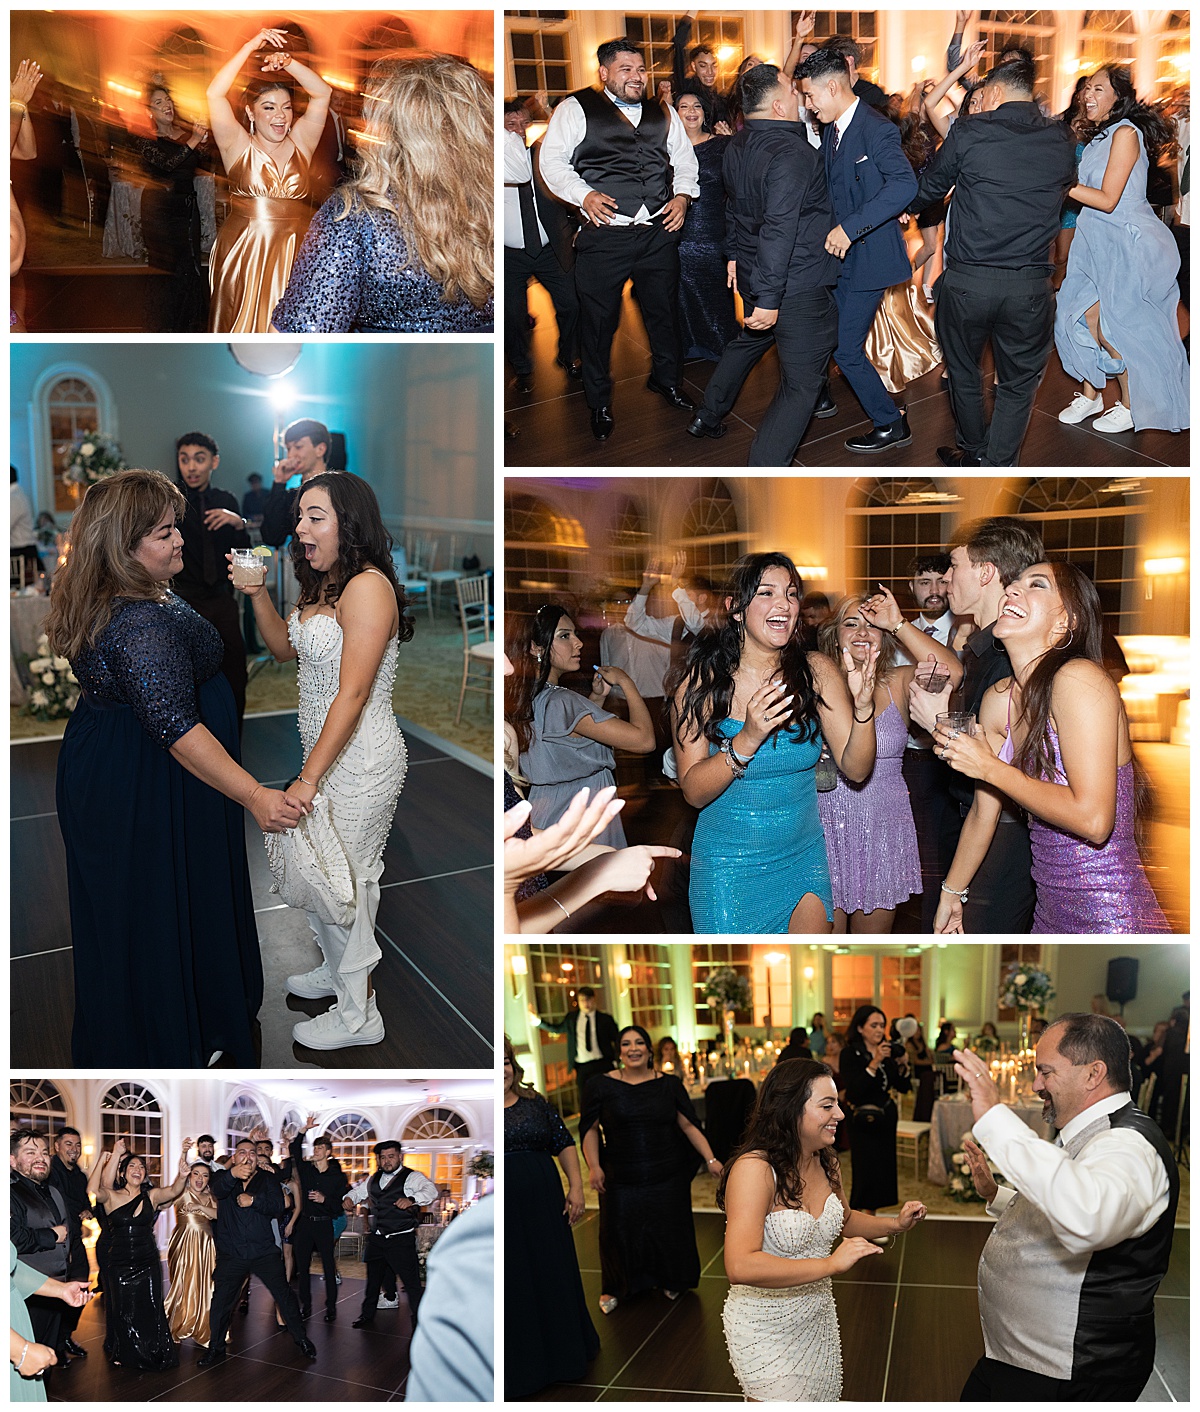 Family and friends dance together for Houston’s Best Wedding Photographers